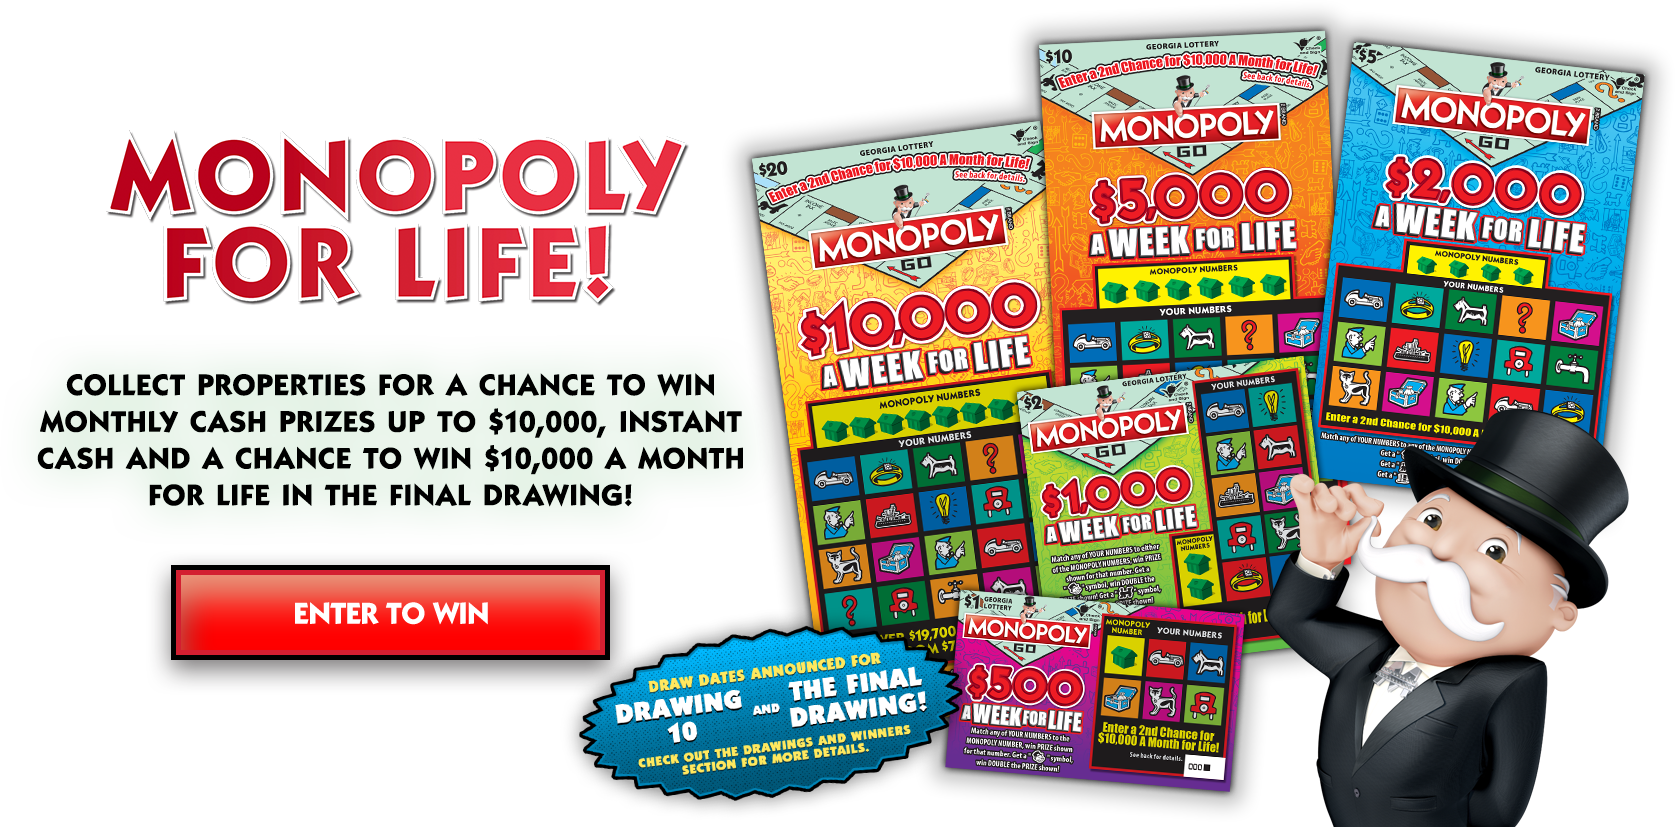 Georgia Lottery - MONOPOLY For Life